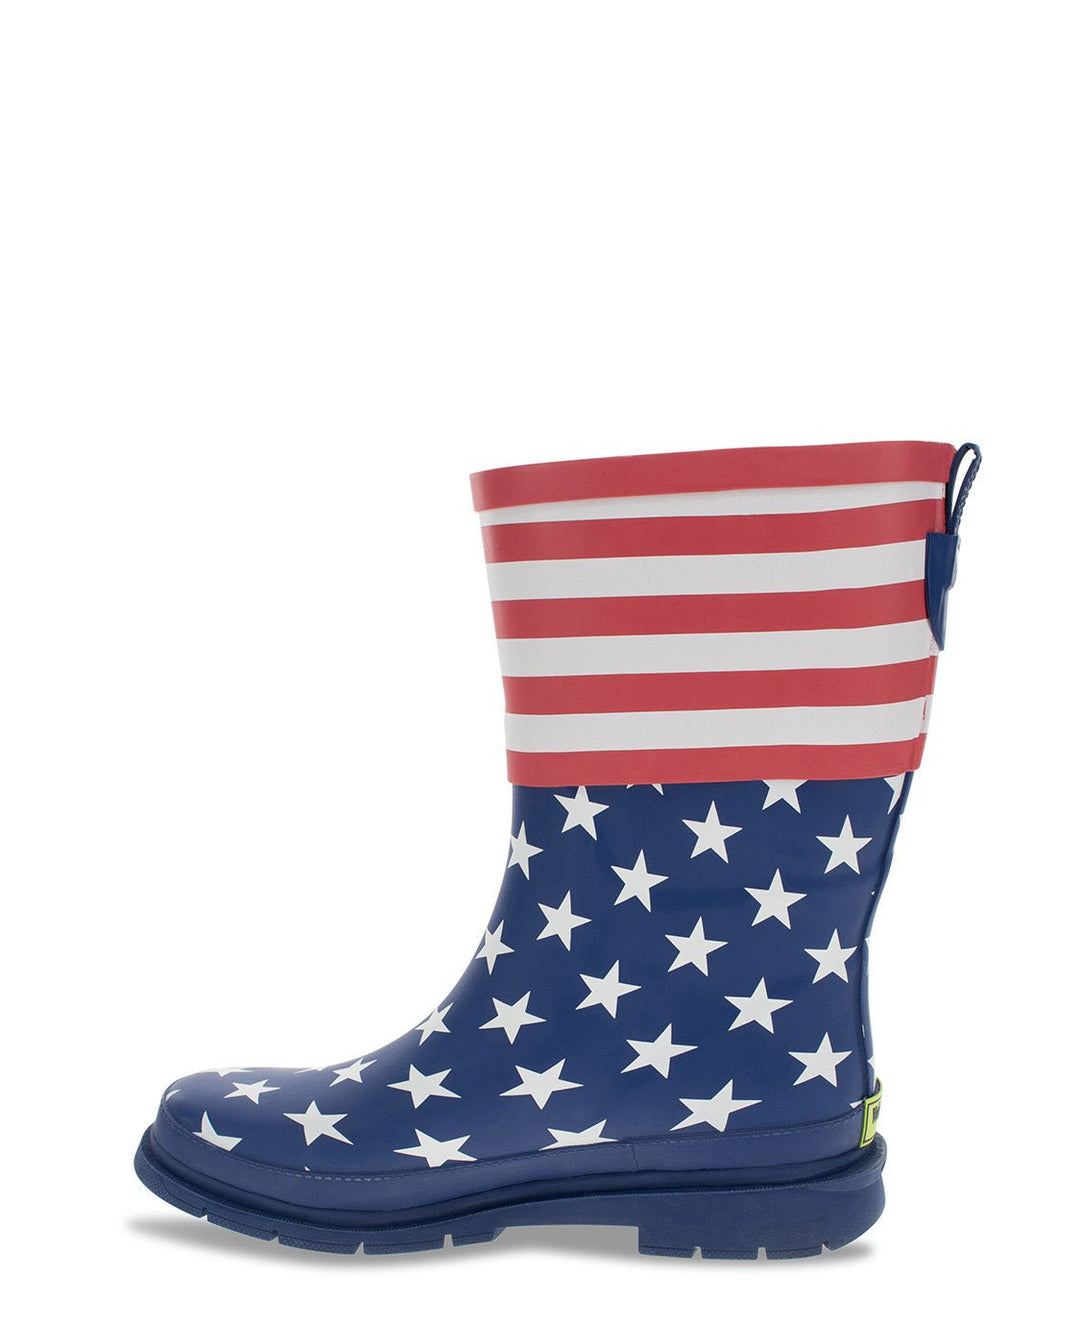 New! Women's Old Glory Mid Rain Boot - Blue - Western Chief